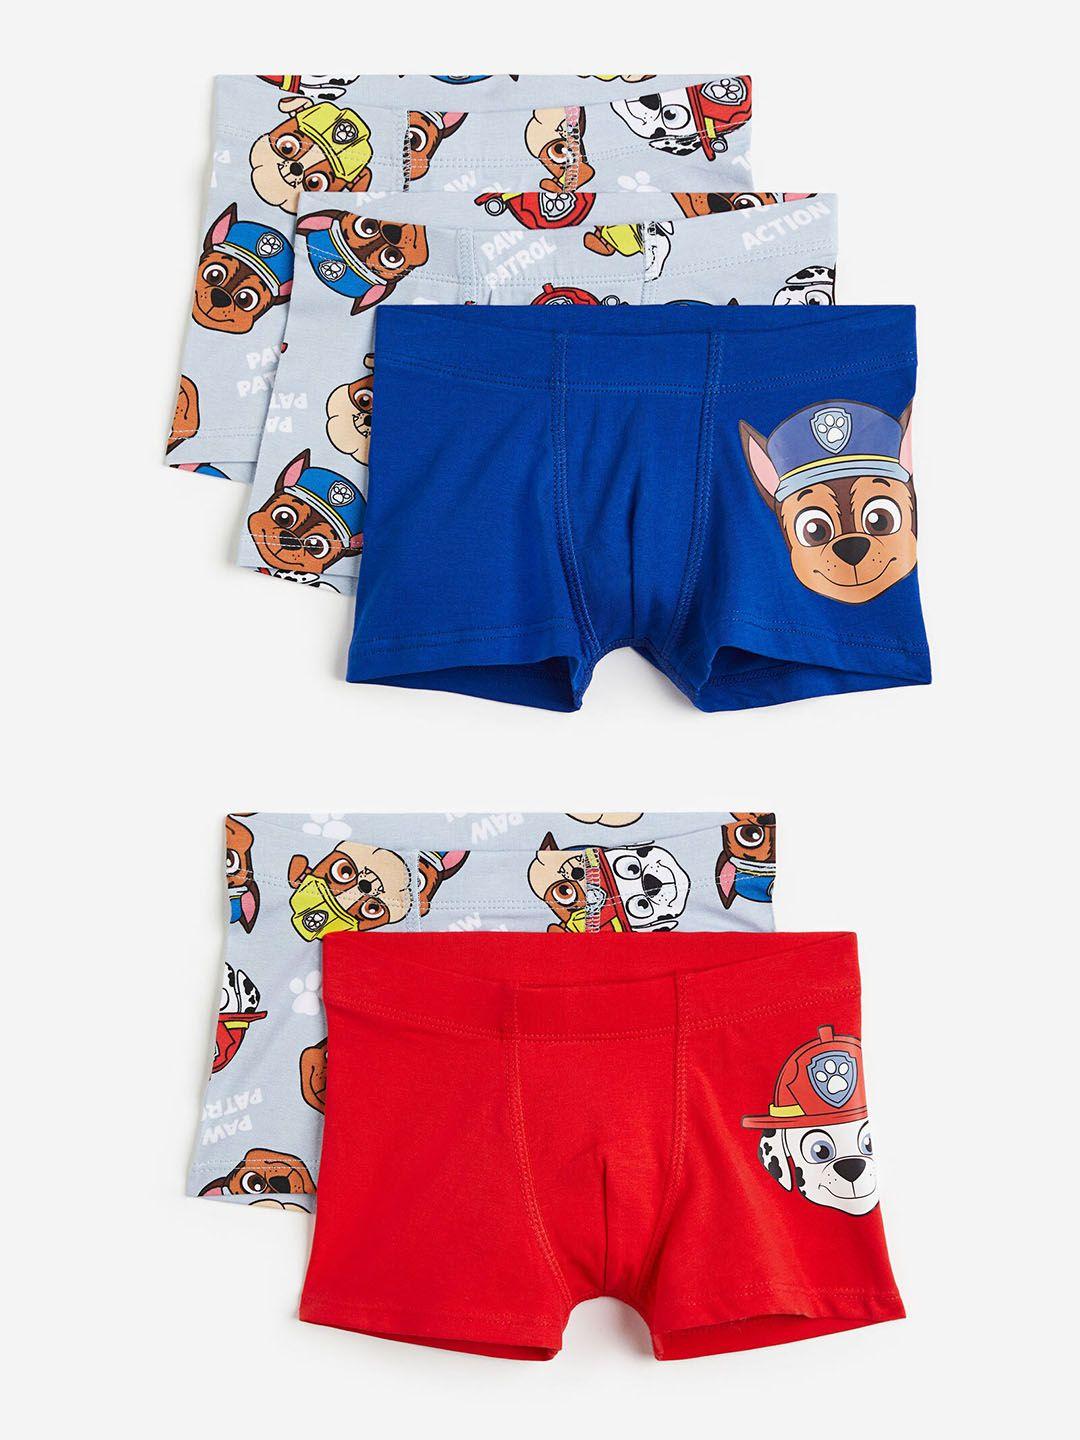 h&m-5-pack-boxer-shorts